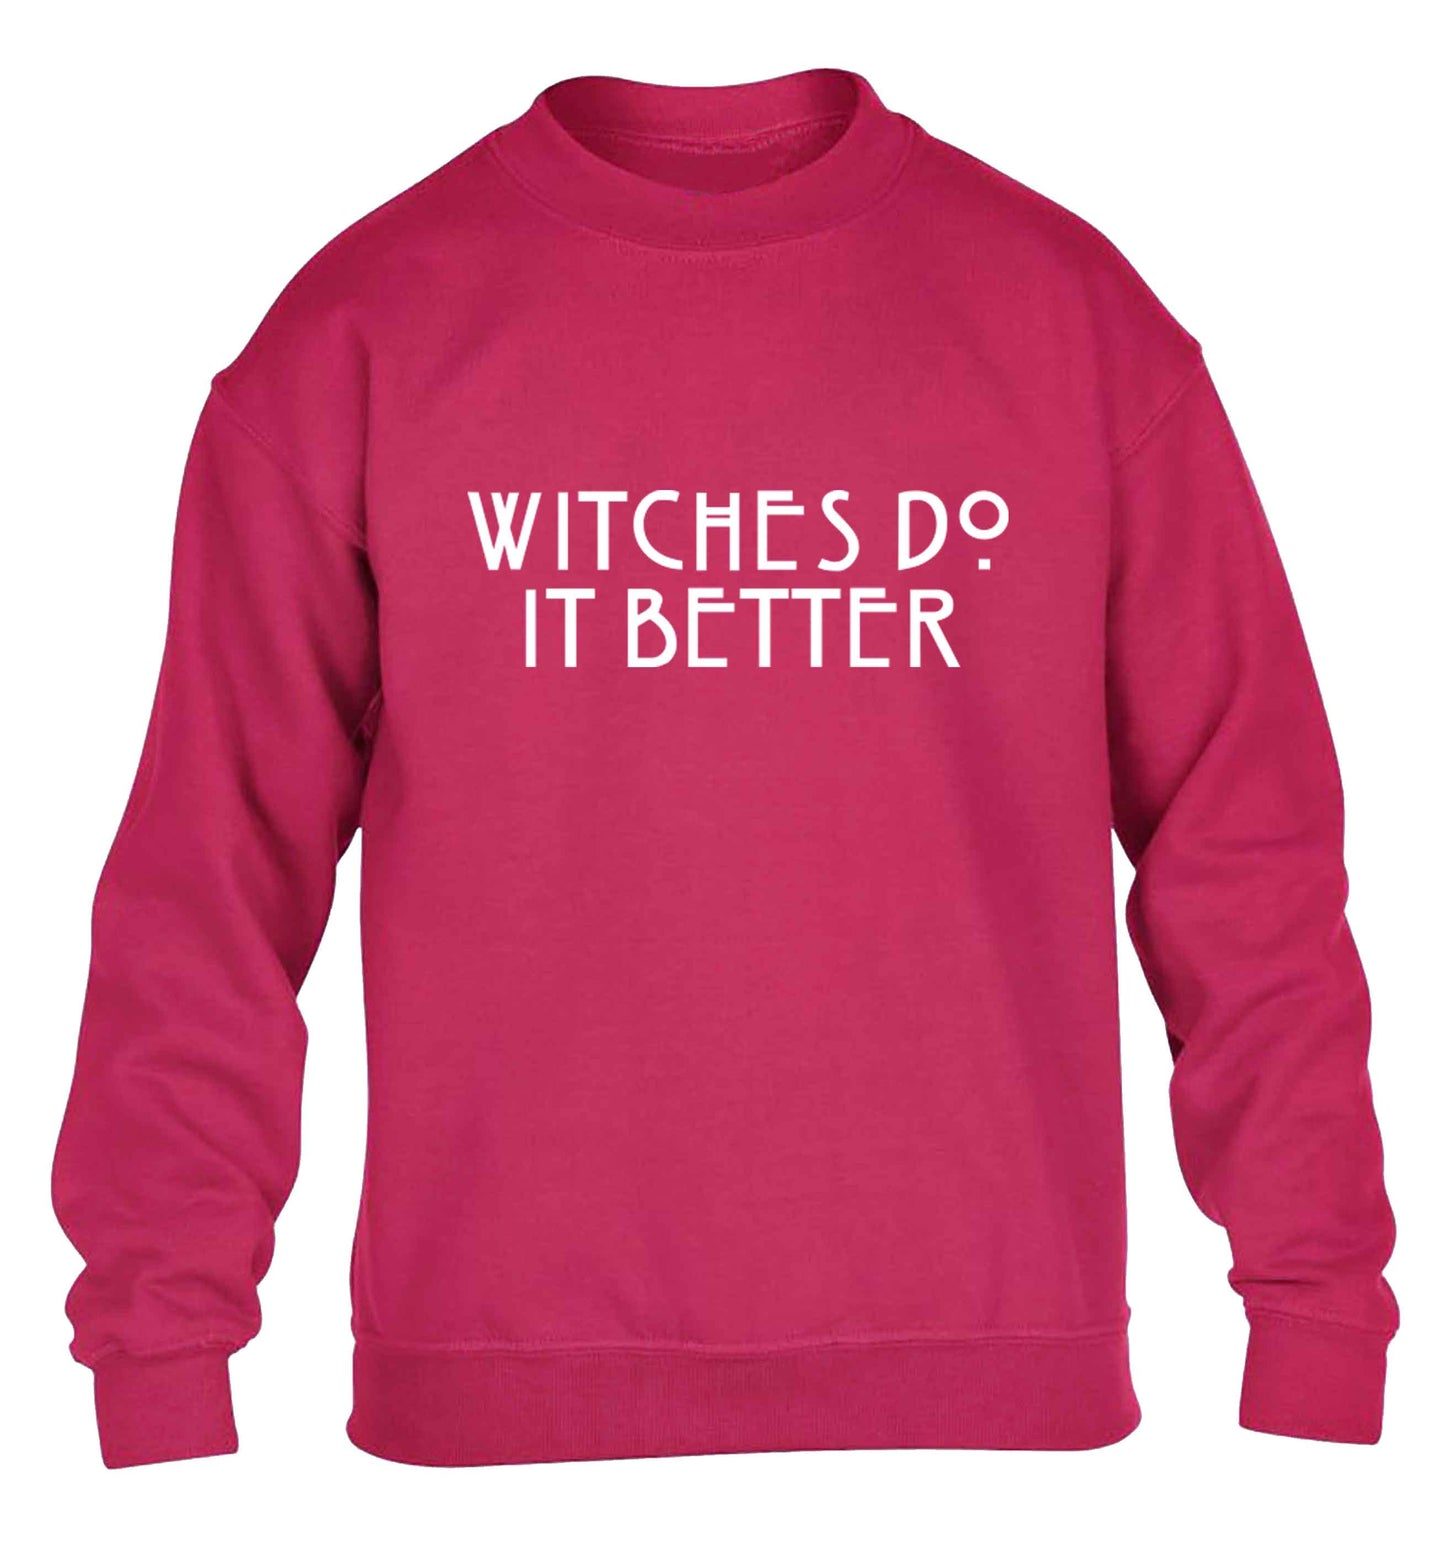 Witches do it better children's pink sweater 12-13 Years